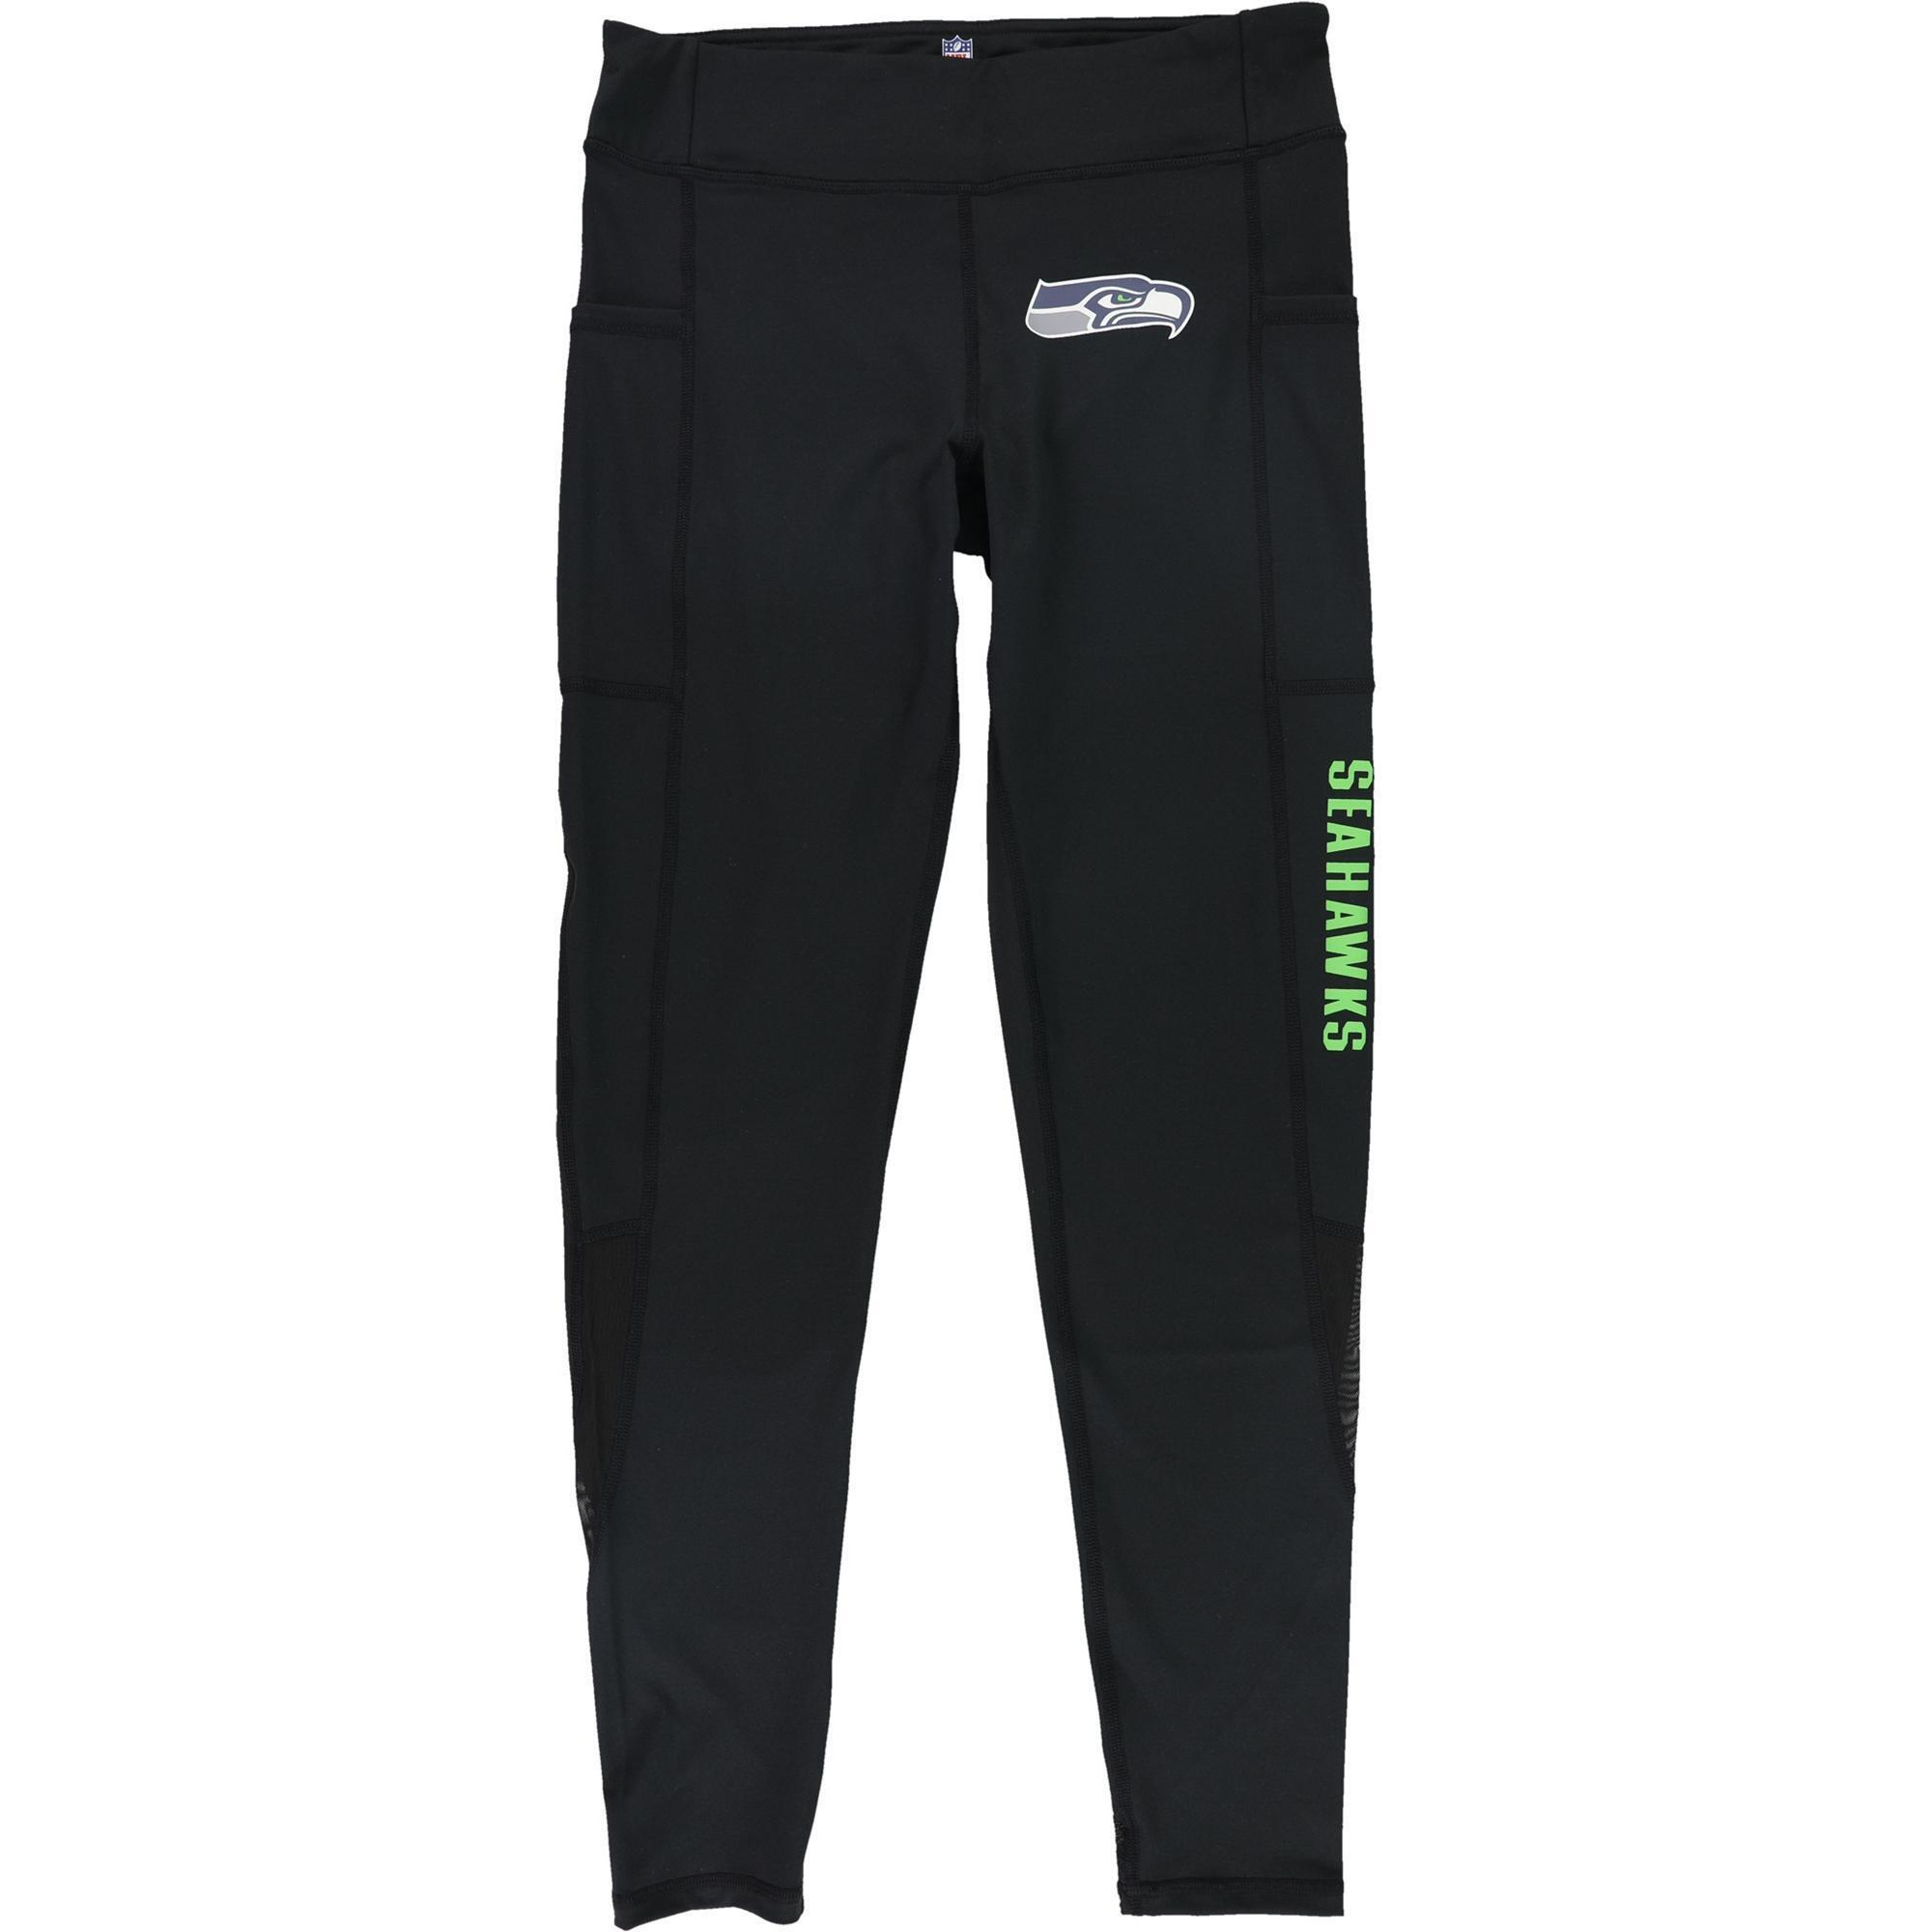 MSX Womens Seattle Seahawks Compression Athletic Pants, Style # 6Q20B882